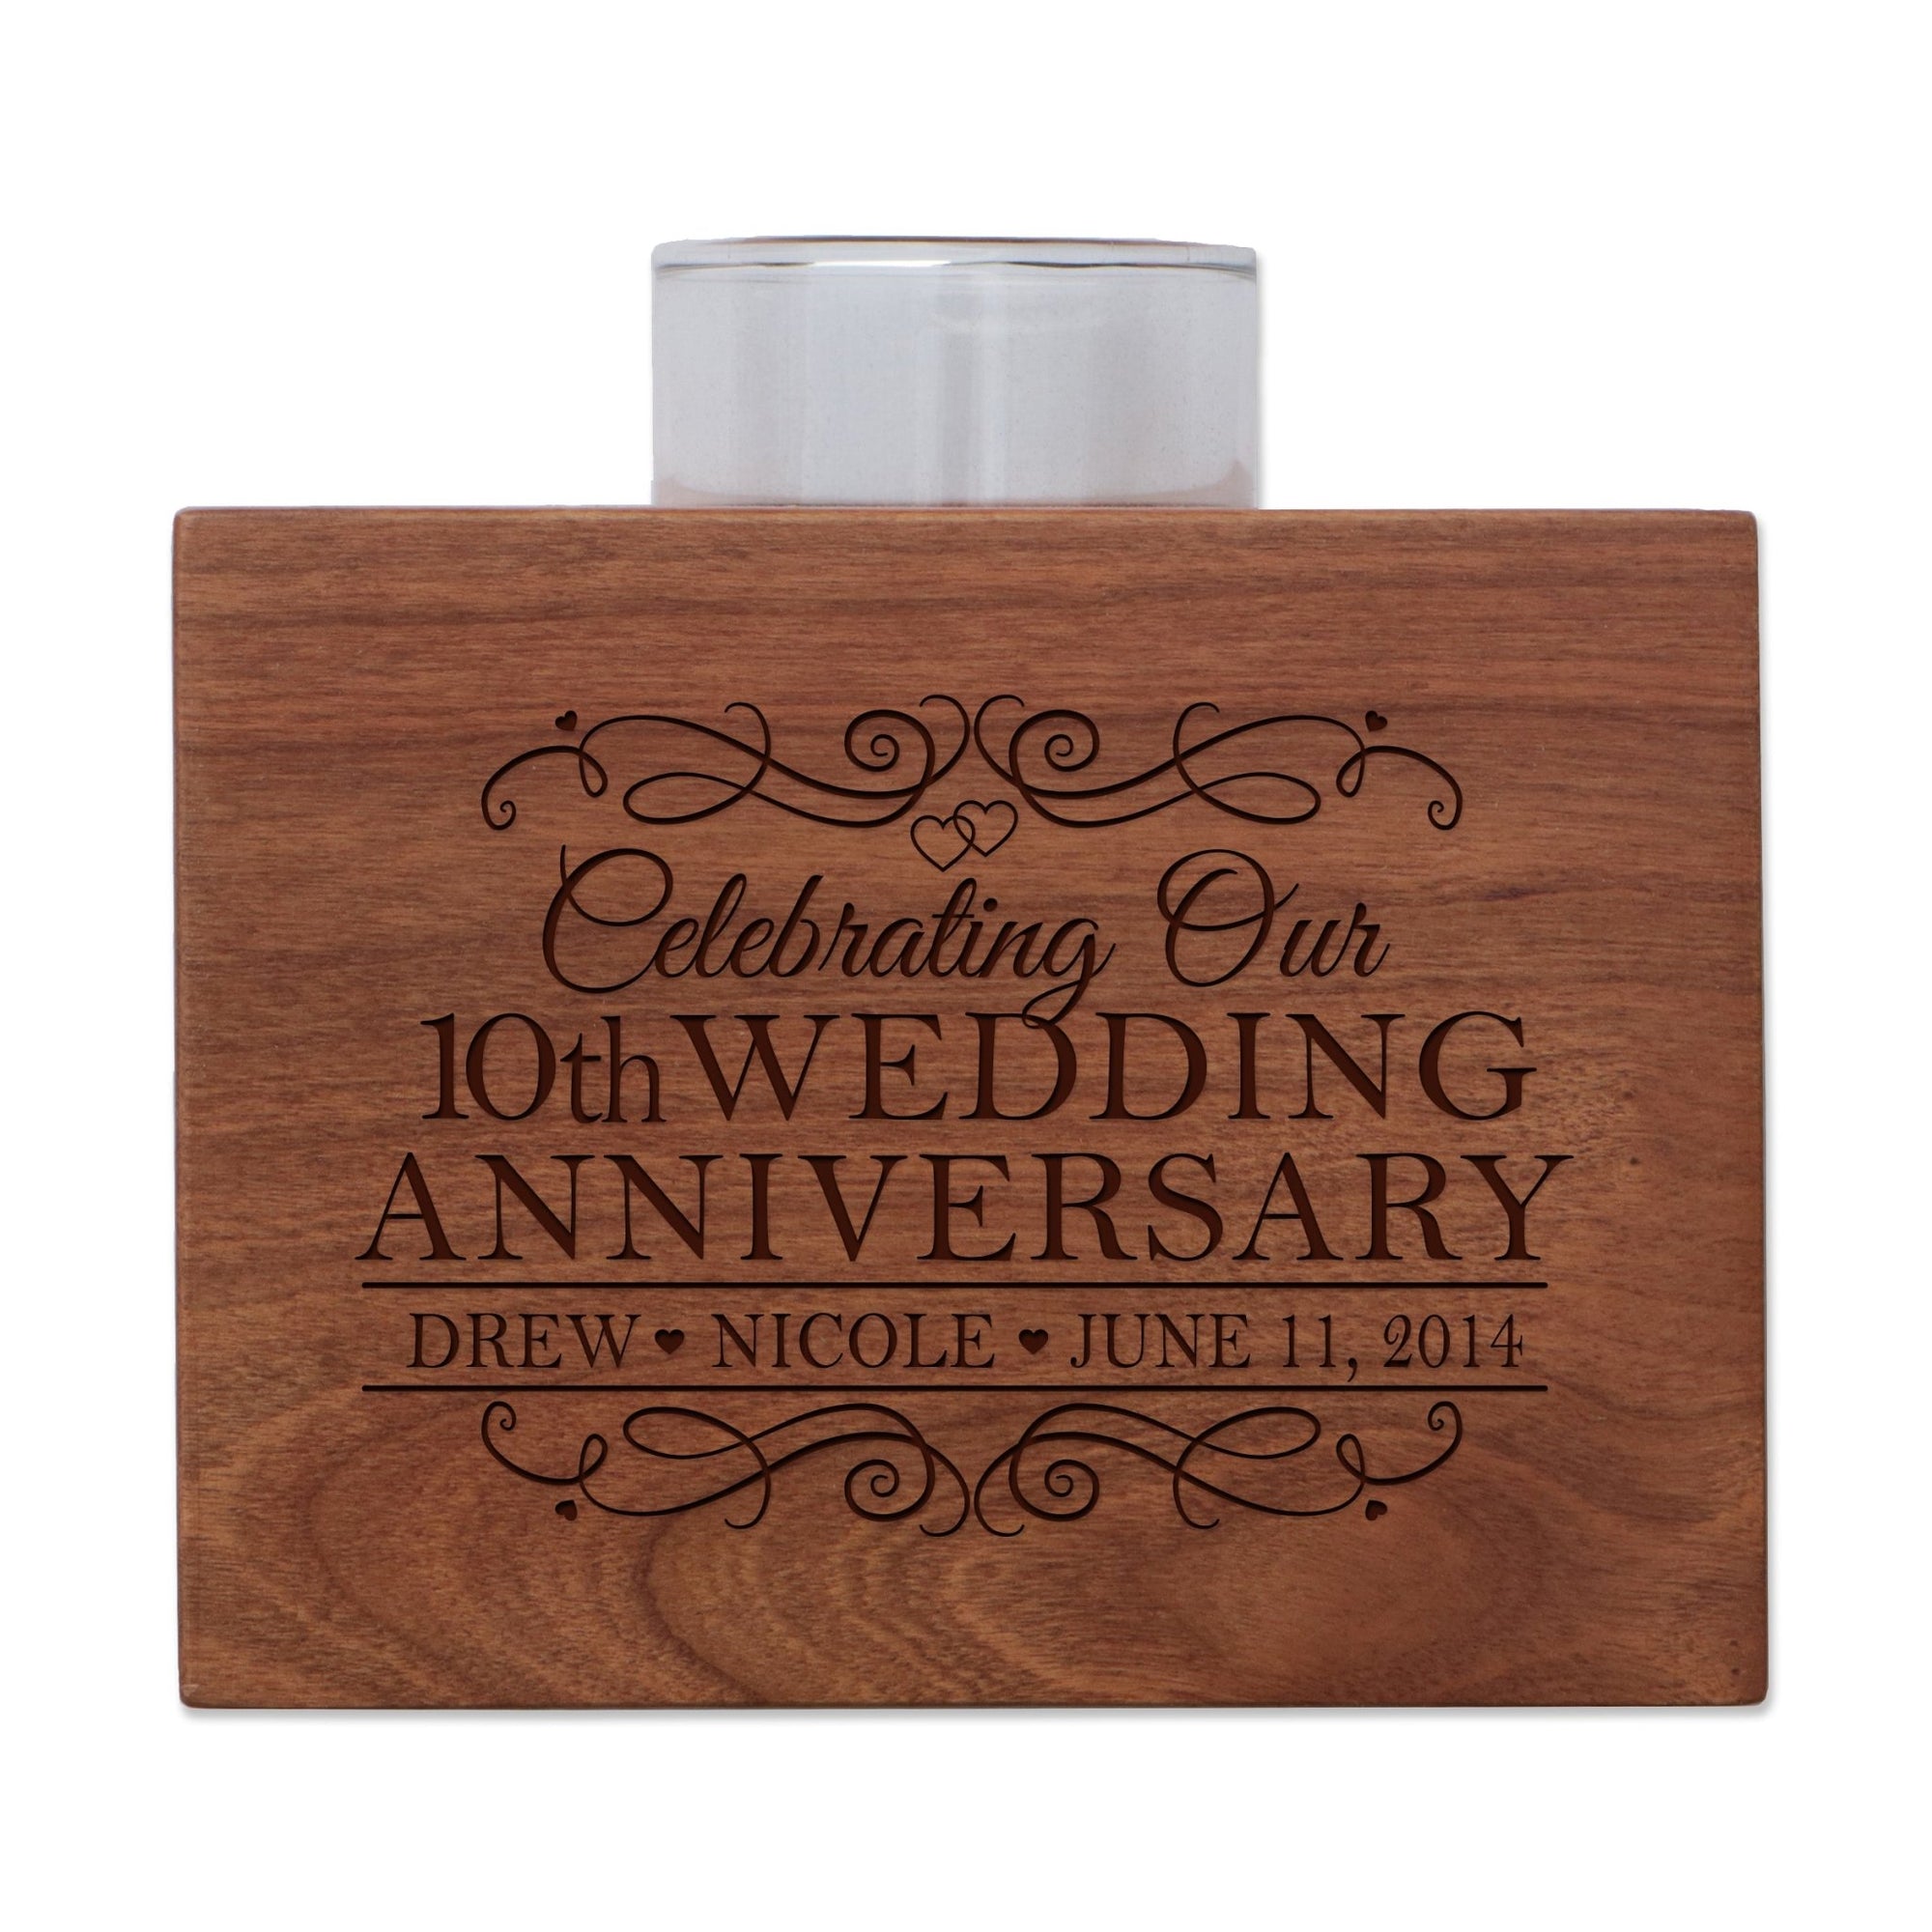 Personalized Cherry Wood Single Votive Candle Holder - 10th Wedding Anniversary - LifeSong Milestones